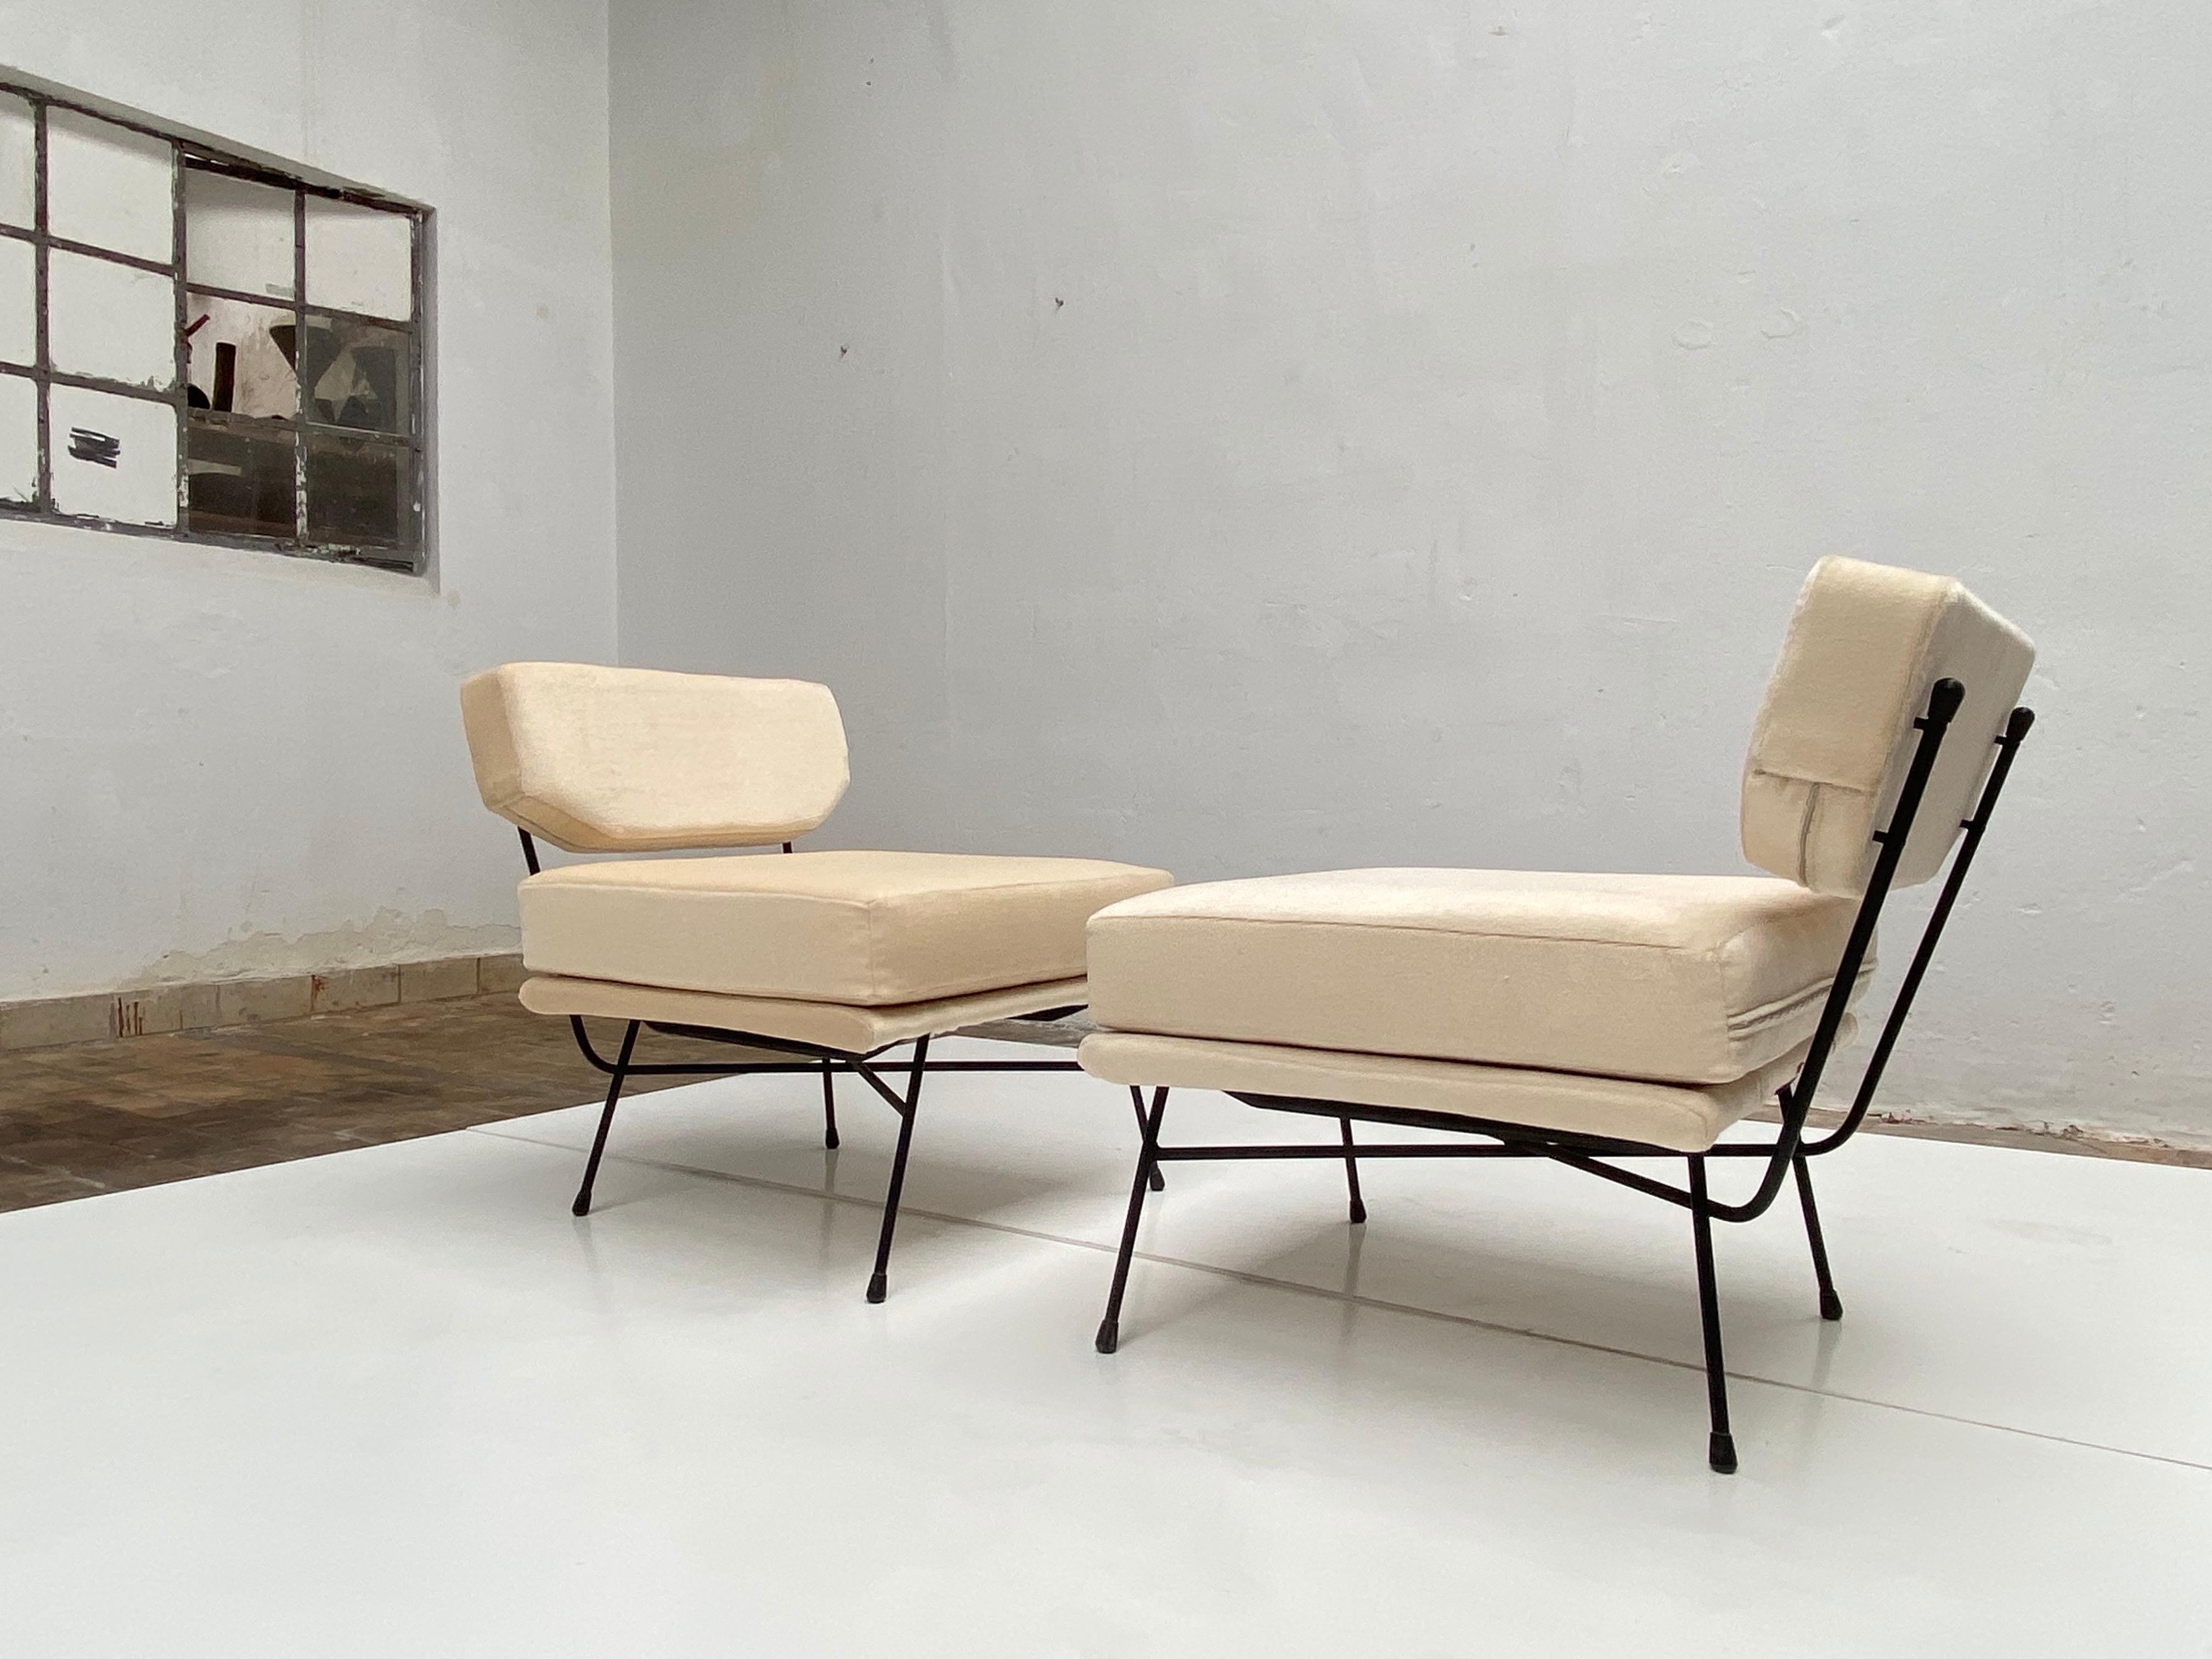 Enameled Pair of 'Elettra' Lounge Chairs by BBPR, Arflex, Italy 1953, Compasso D'Oro 1954